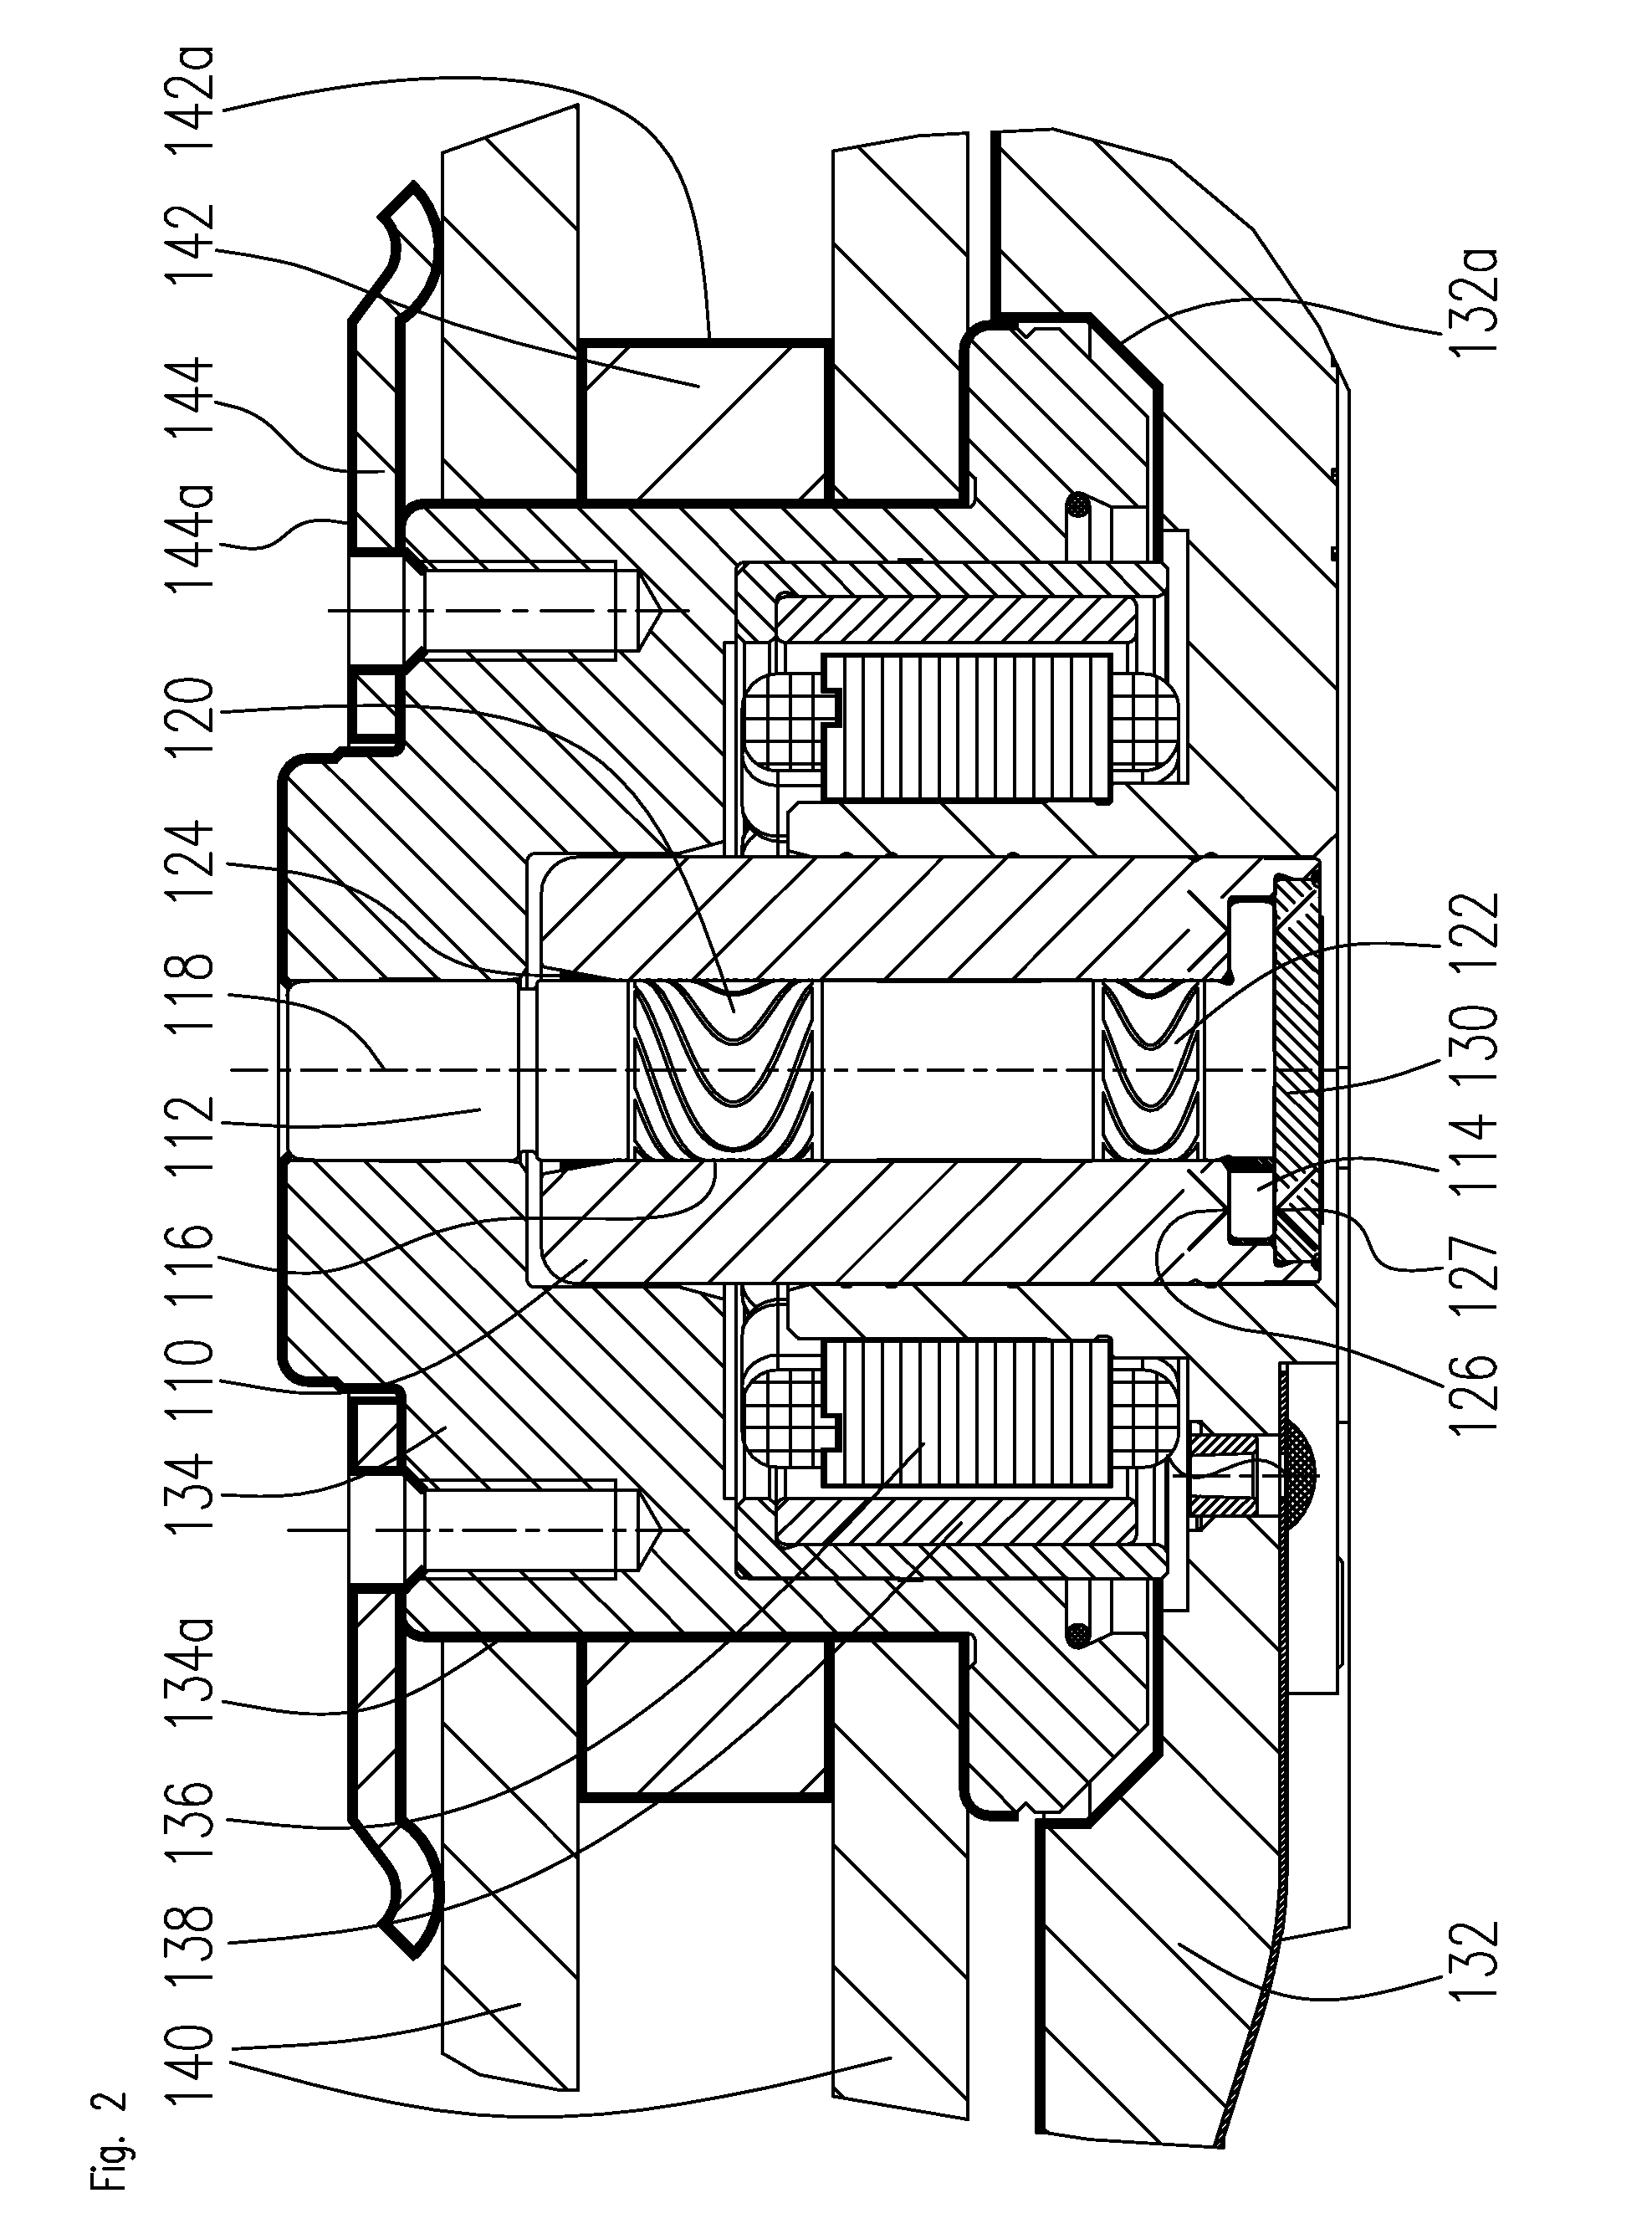 Spindle motor for driving a hard disk drive